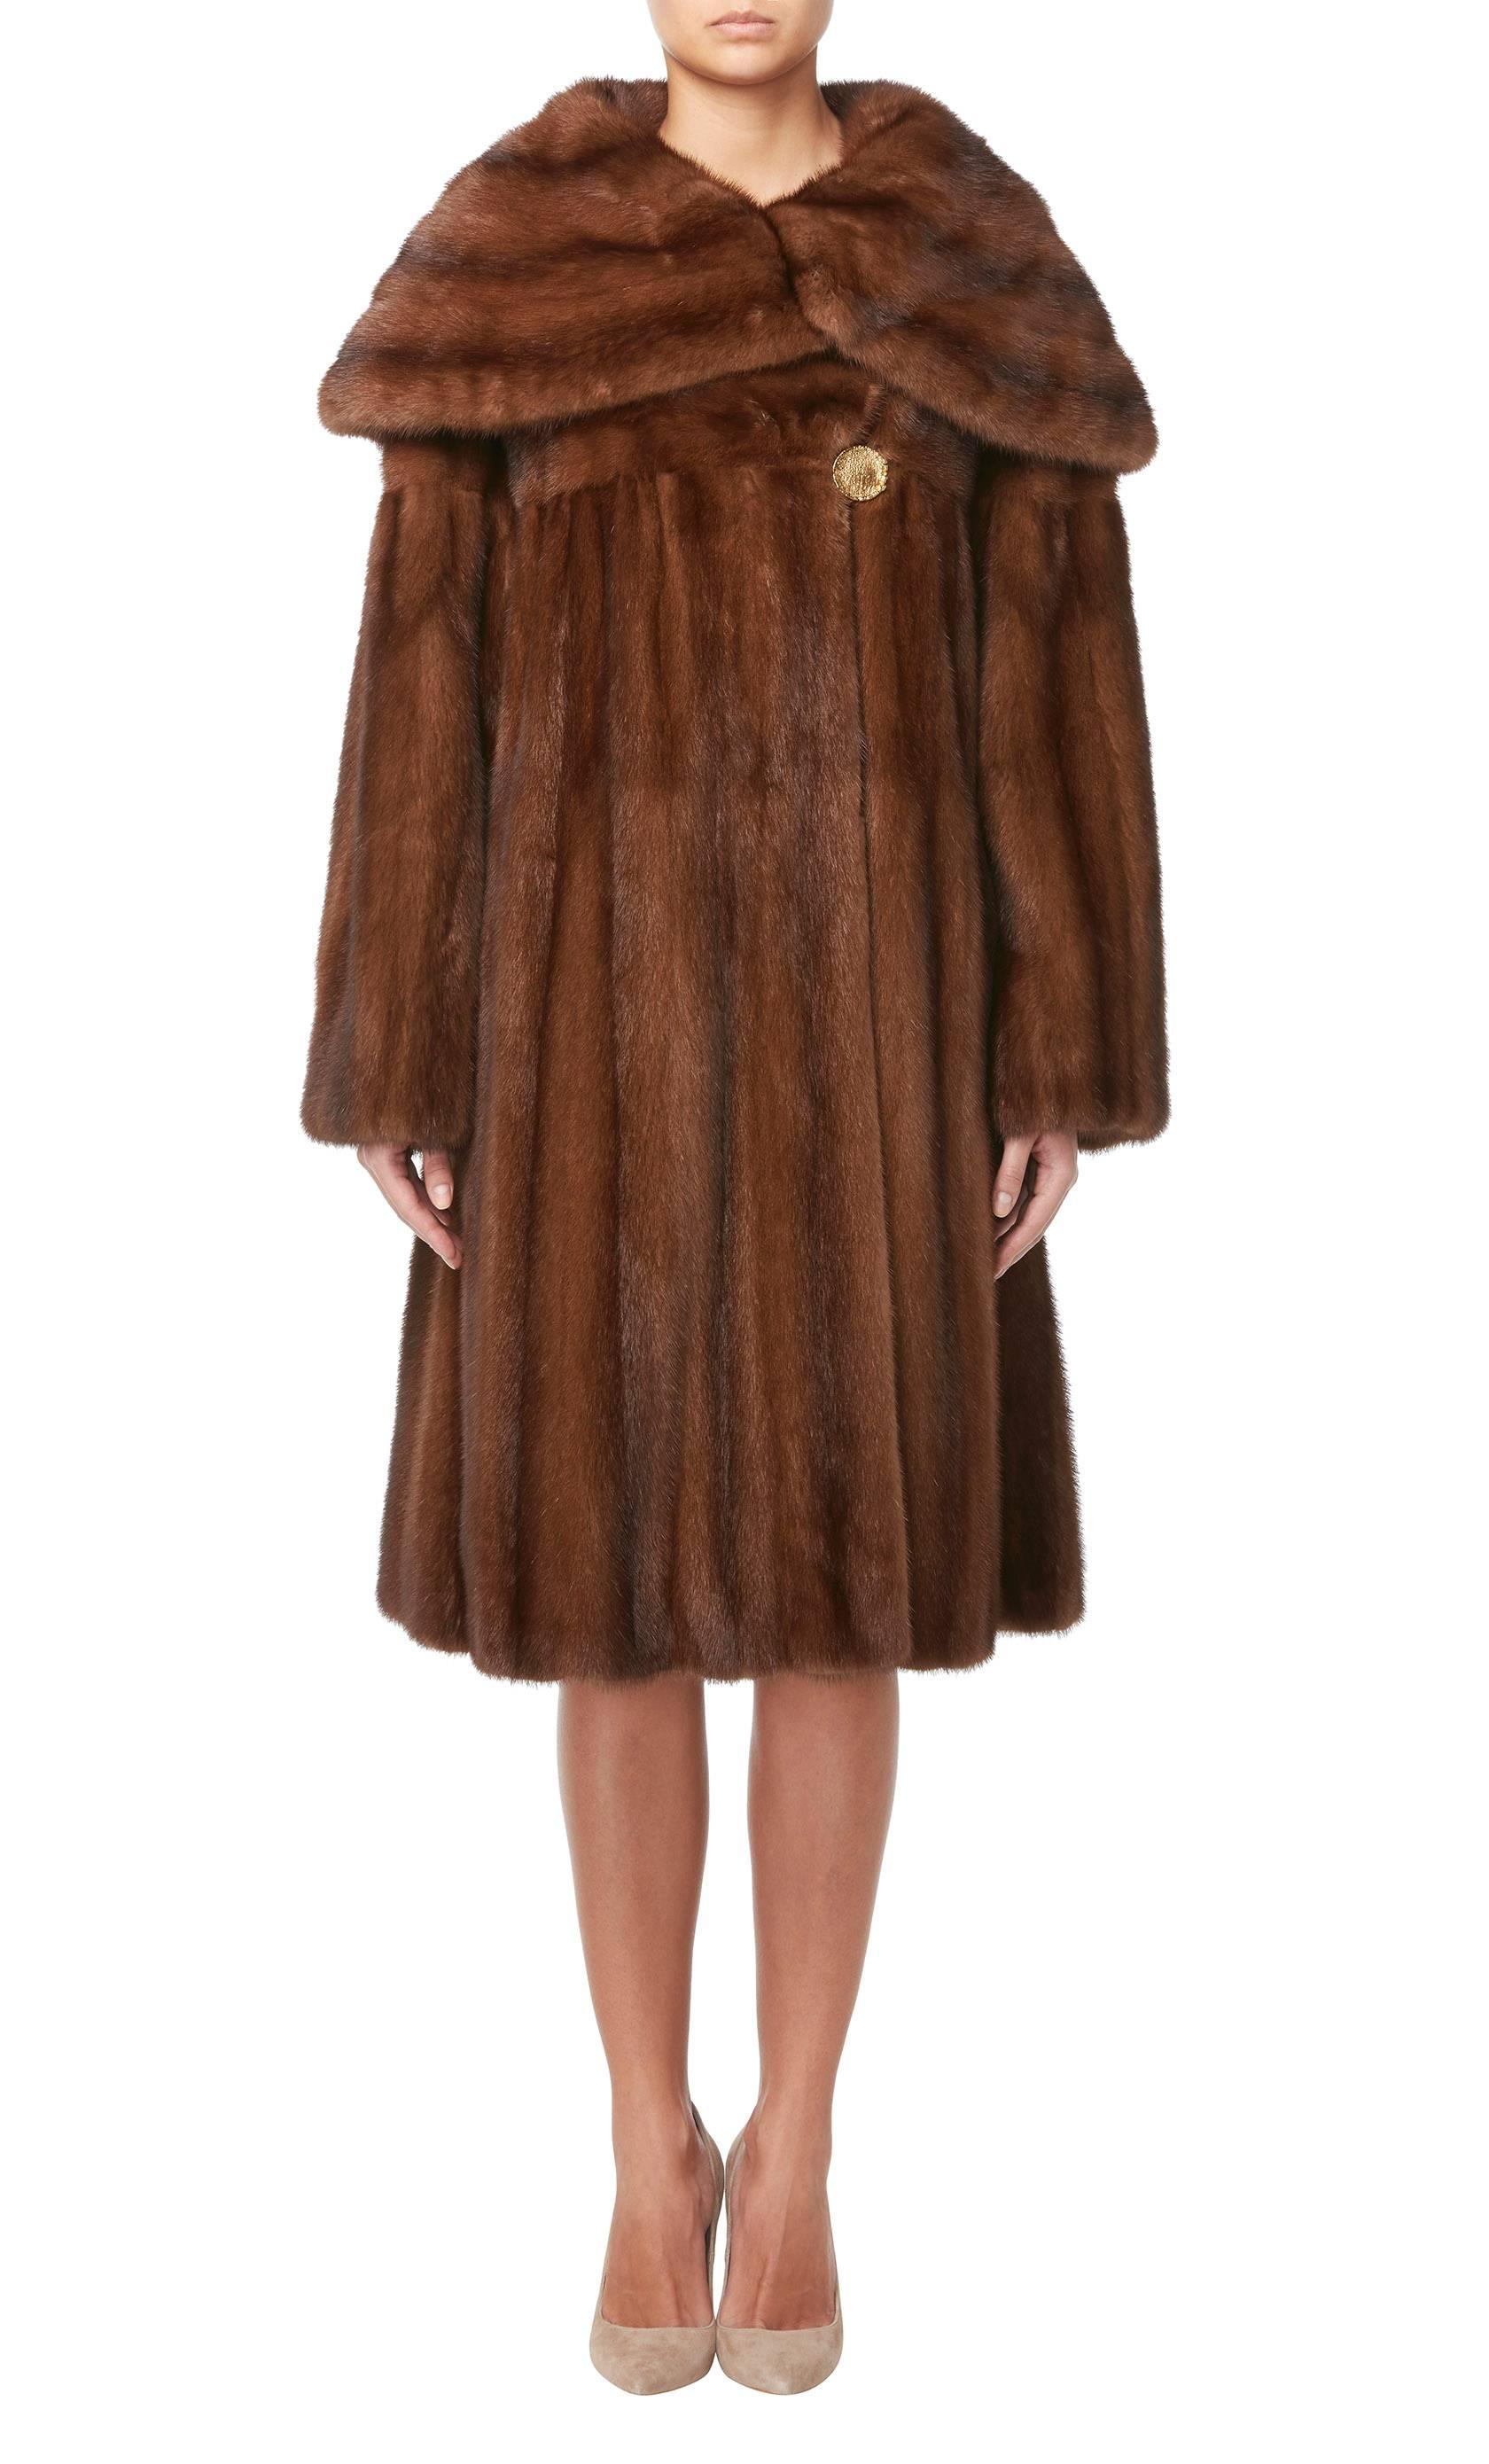 This Marie Martine coat is constructed in soft brown mink fur and is perfect for cold winter days or nights. With a wide caped collar, the coat fastens with a single god metal button to the front and has inside pockets on the hip.

Constructed in